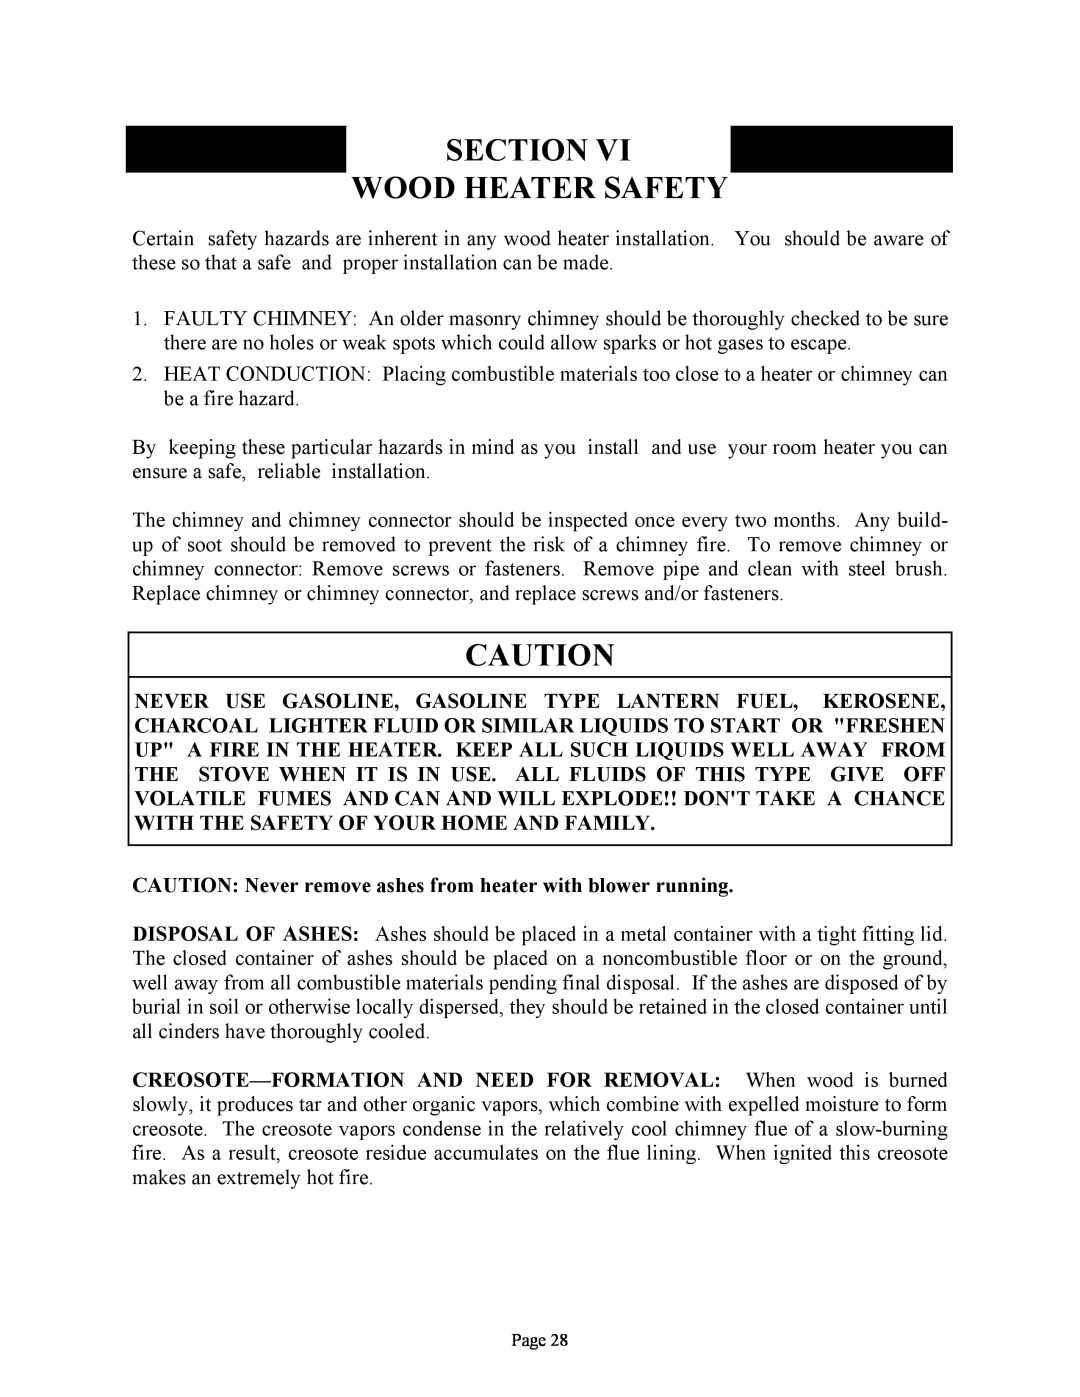 New Buck Corporation FS 21 installation instructions Section Wood Heater Safety 